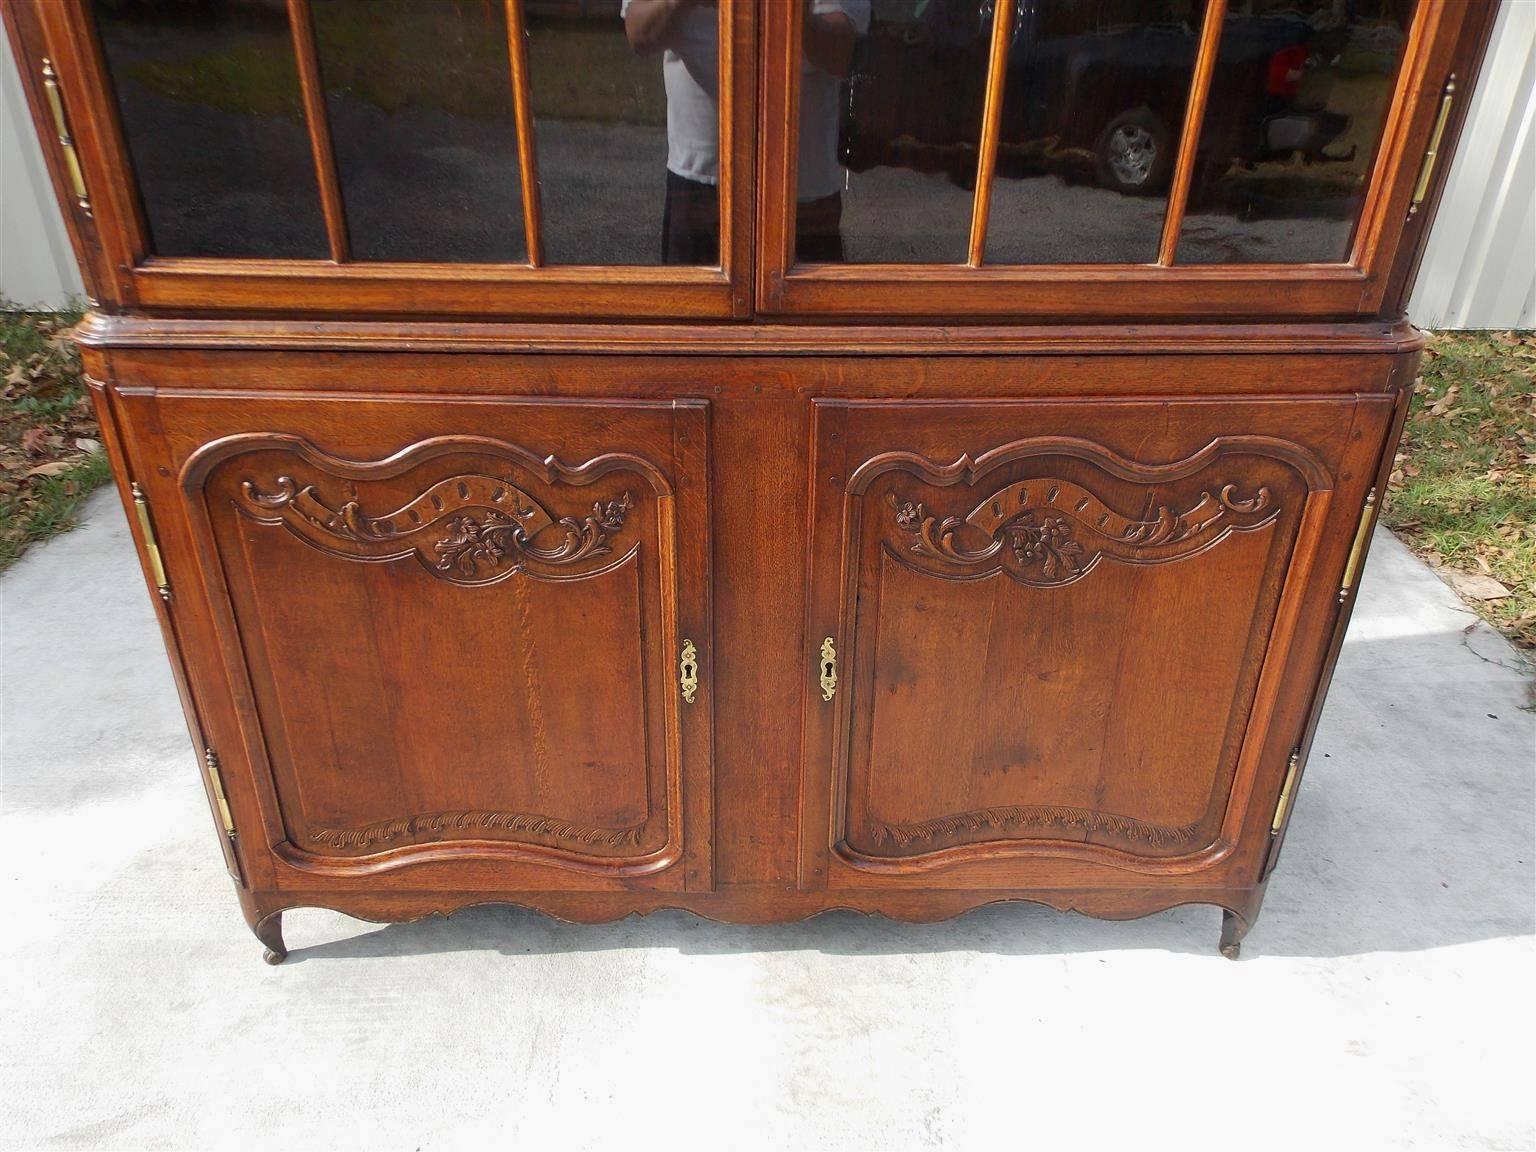 Late 18th Century French Provincial Walnut Flanking Glass & Cabinet Arched Dome Cupboard, C. 1780 For Sale